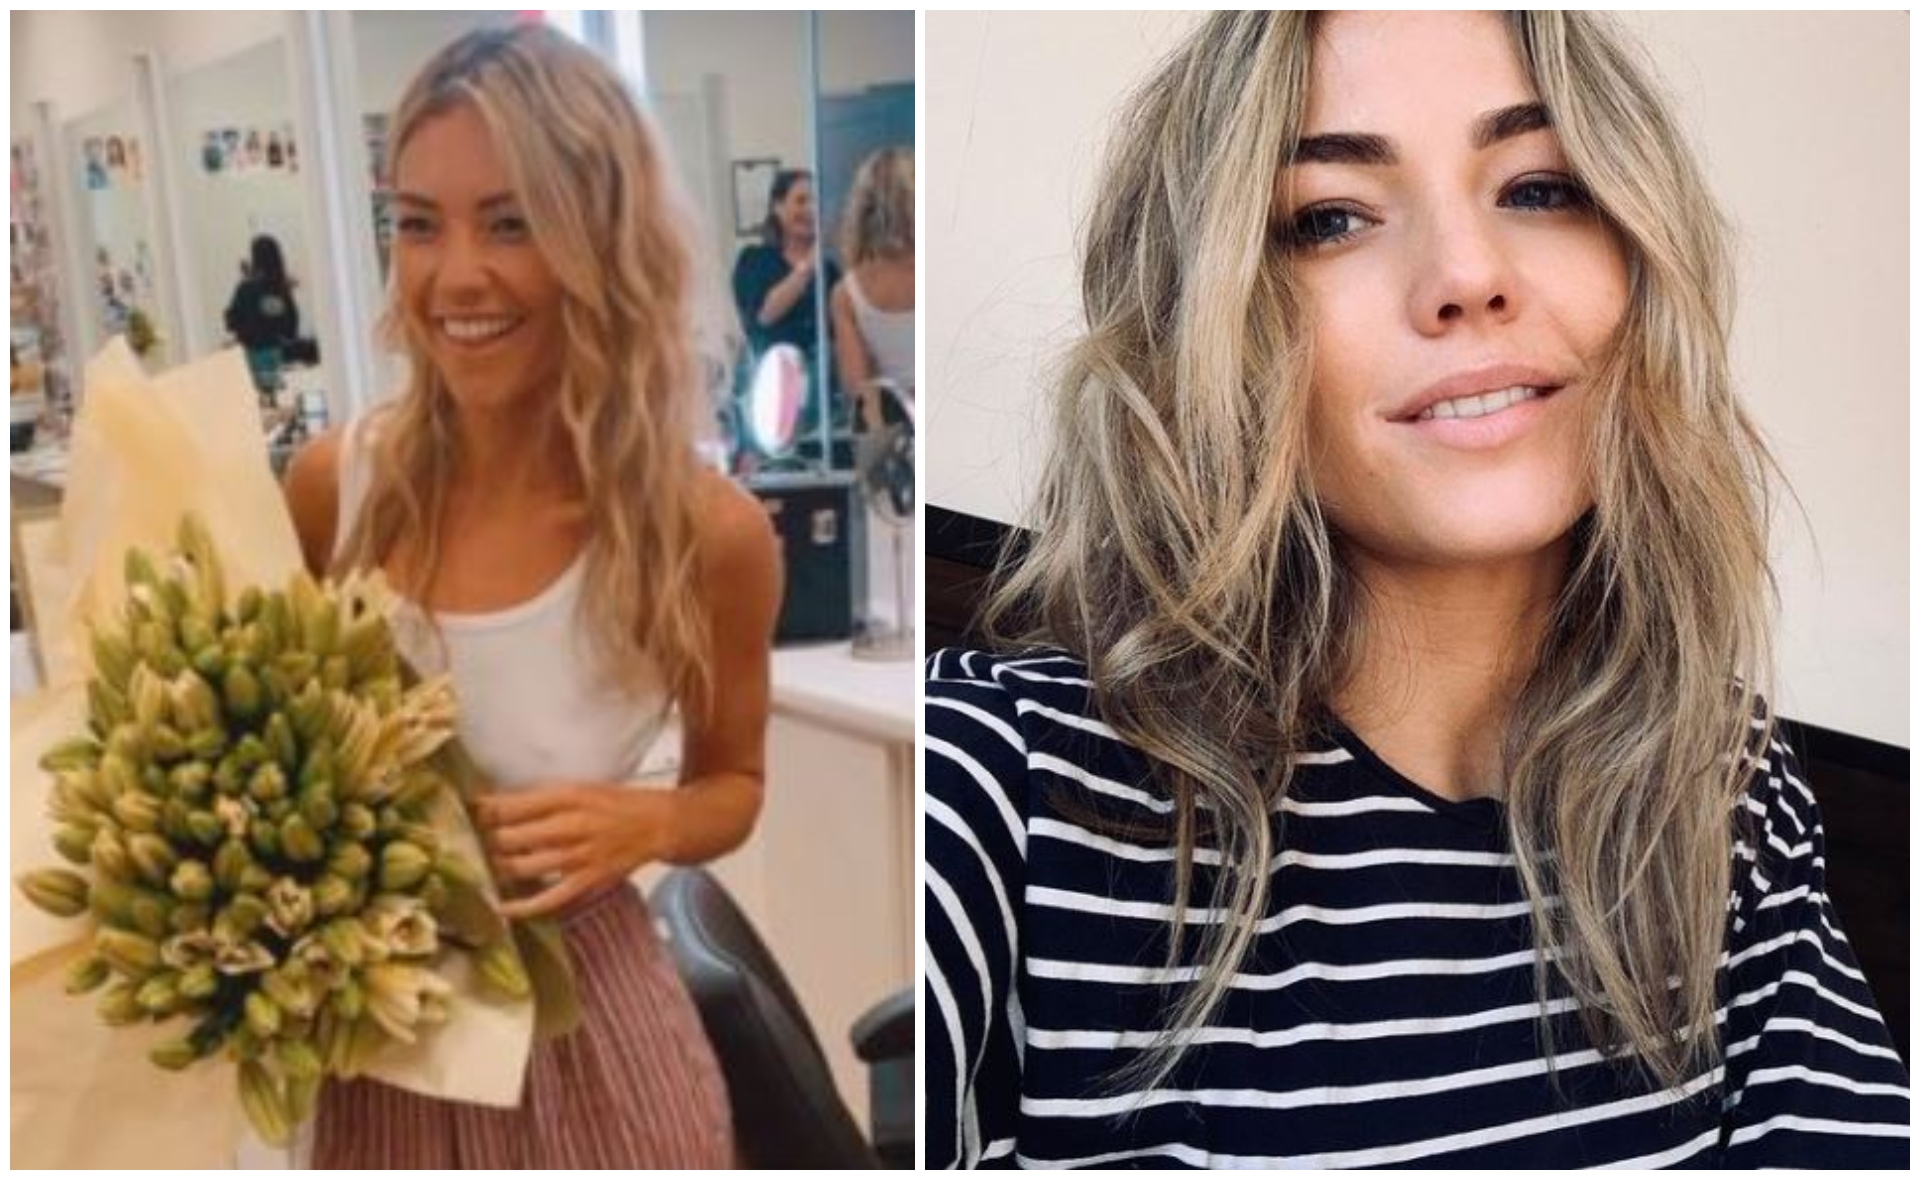 Sam Frost fuels dating rumours after sharing a cute snap of a suss bunch of flowers – so naturally, we’ve jumped straight into investigative mode